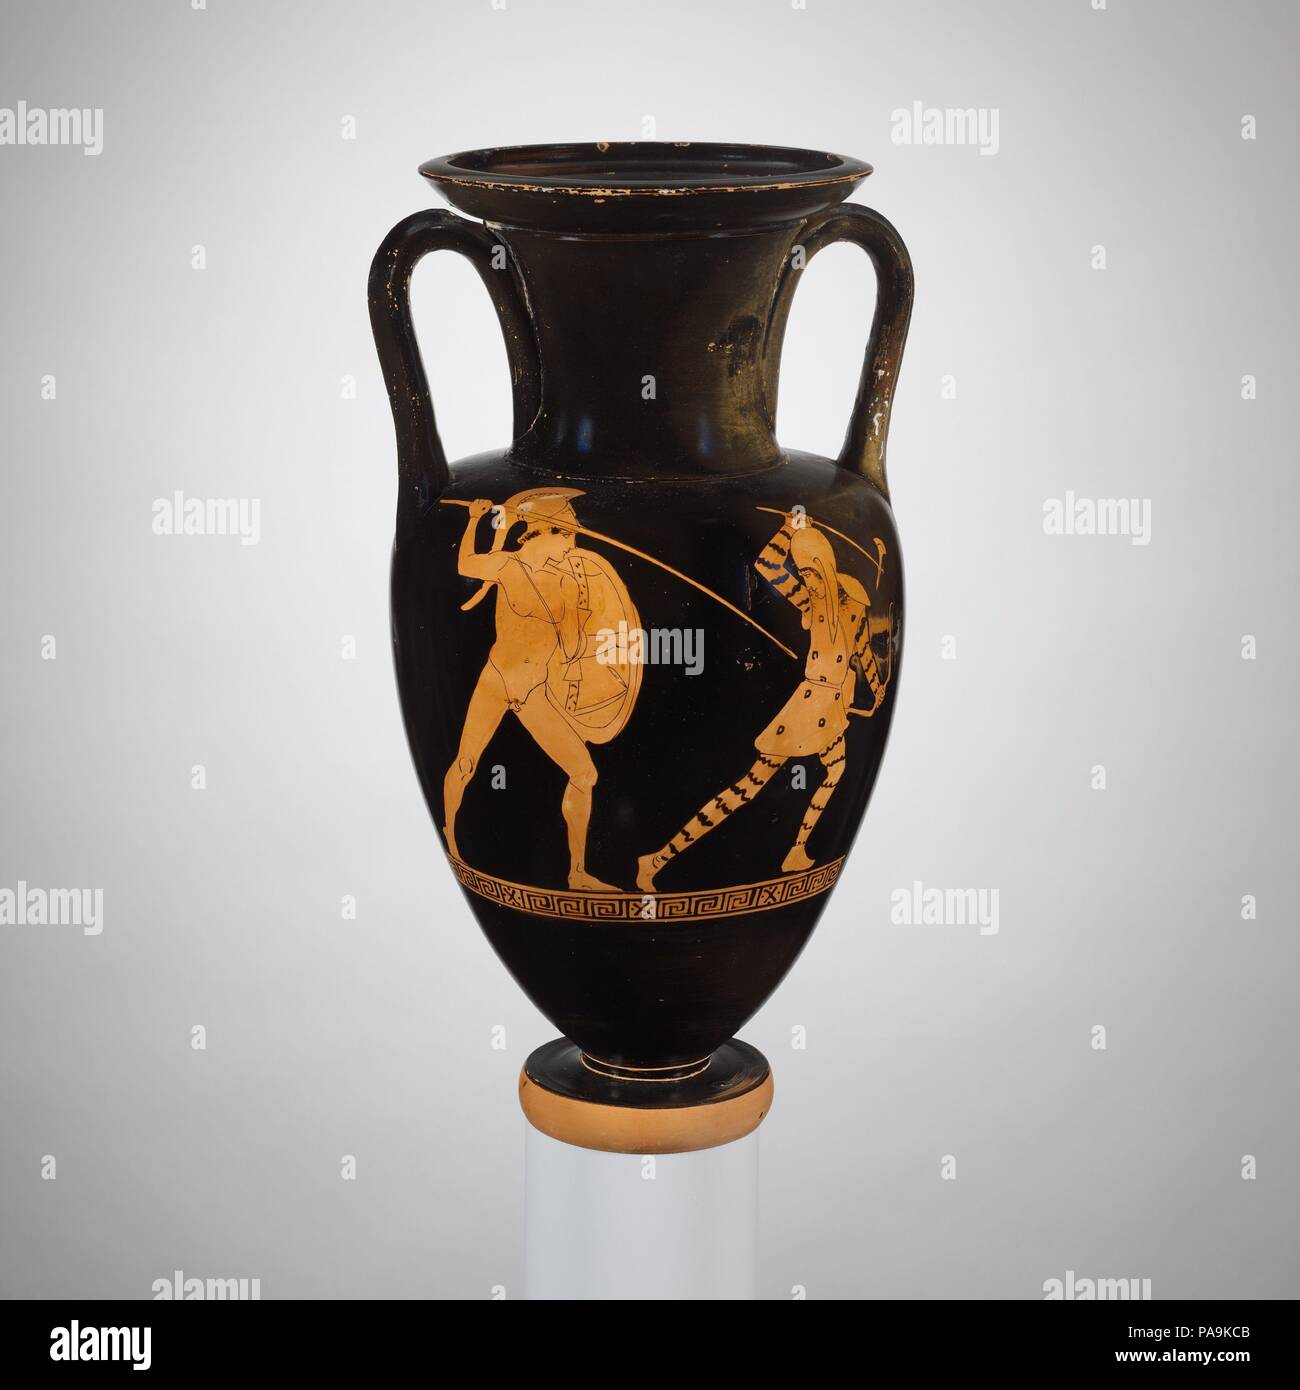 Terracotta Nolan neck-amphora (jar). Culture: Greek, Attic. Dimensions: H. 13 in. (33 cm); diameter of mouth  5 15/16 in. (15.1 cm); diameter of foot  3 1/2 in. (8.9 cm). Date: ca. 440-430 B.C..  Obverse, Greek fighting an Amazon  Reverse, man with staff  The combination of subjects on the obverse and reverse is thought-provoking because one is mythological and the other reflects fifth-century B.C. Athens. In its mythological prehistory, Athens was attacked by the Amazons, a tribe of warrior-women whose homeland lay beyond the Black Sea. Theseus, the legendary king of Attica, fought against th Stock Photo